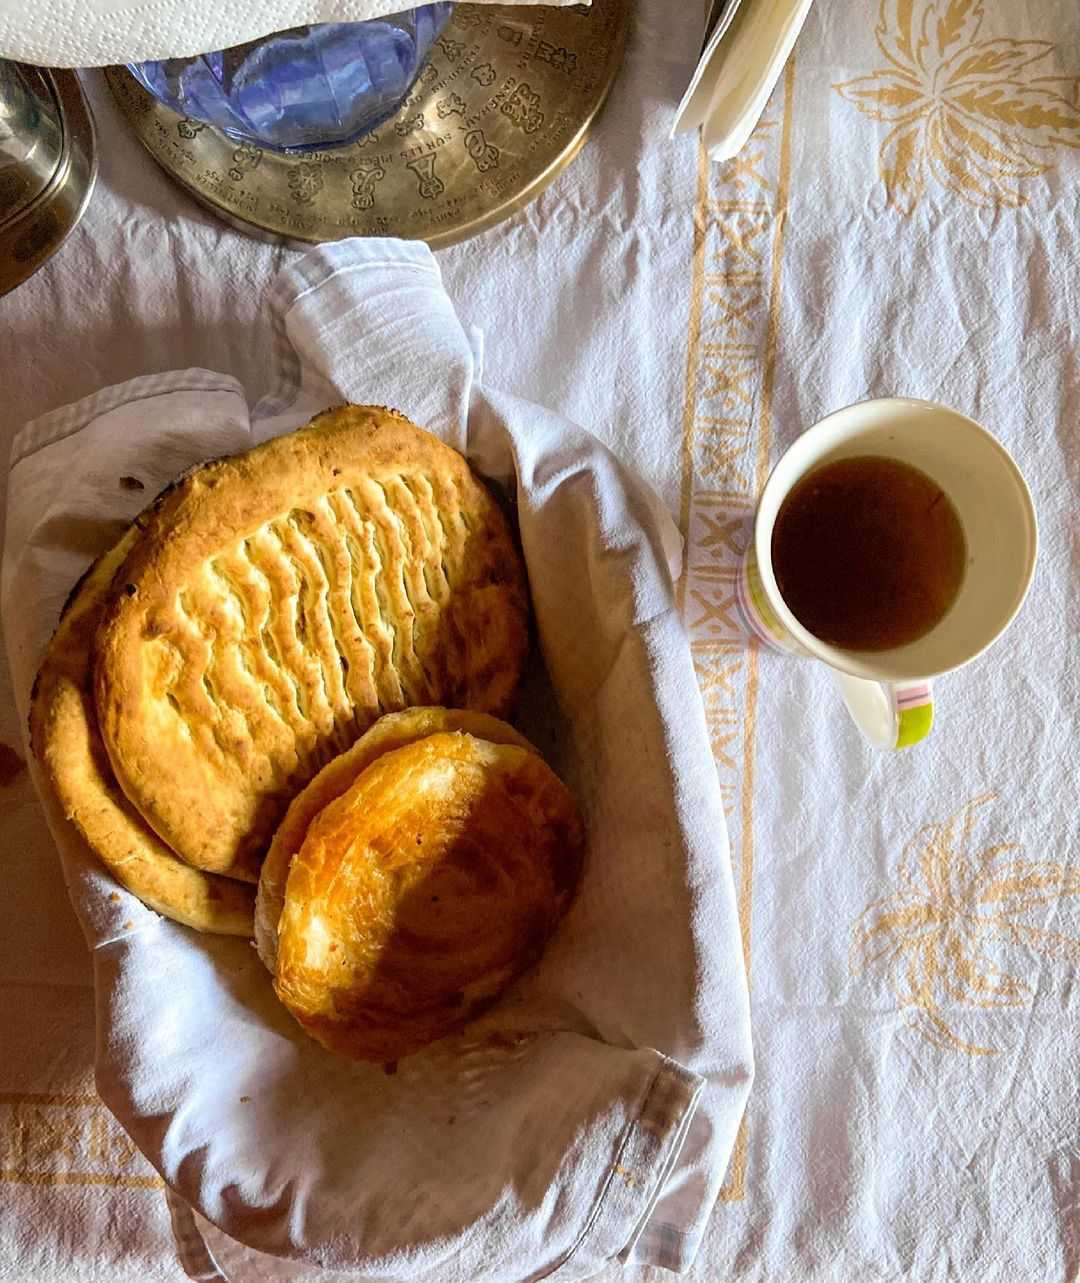 Girda & Kahwa, a traditional breakfast in the Kashmir Valley